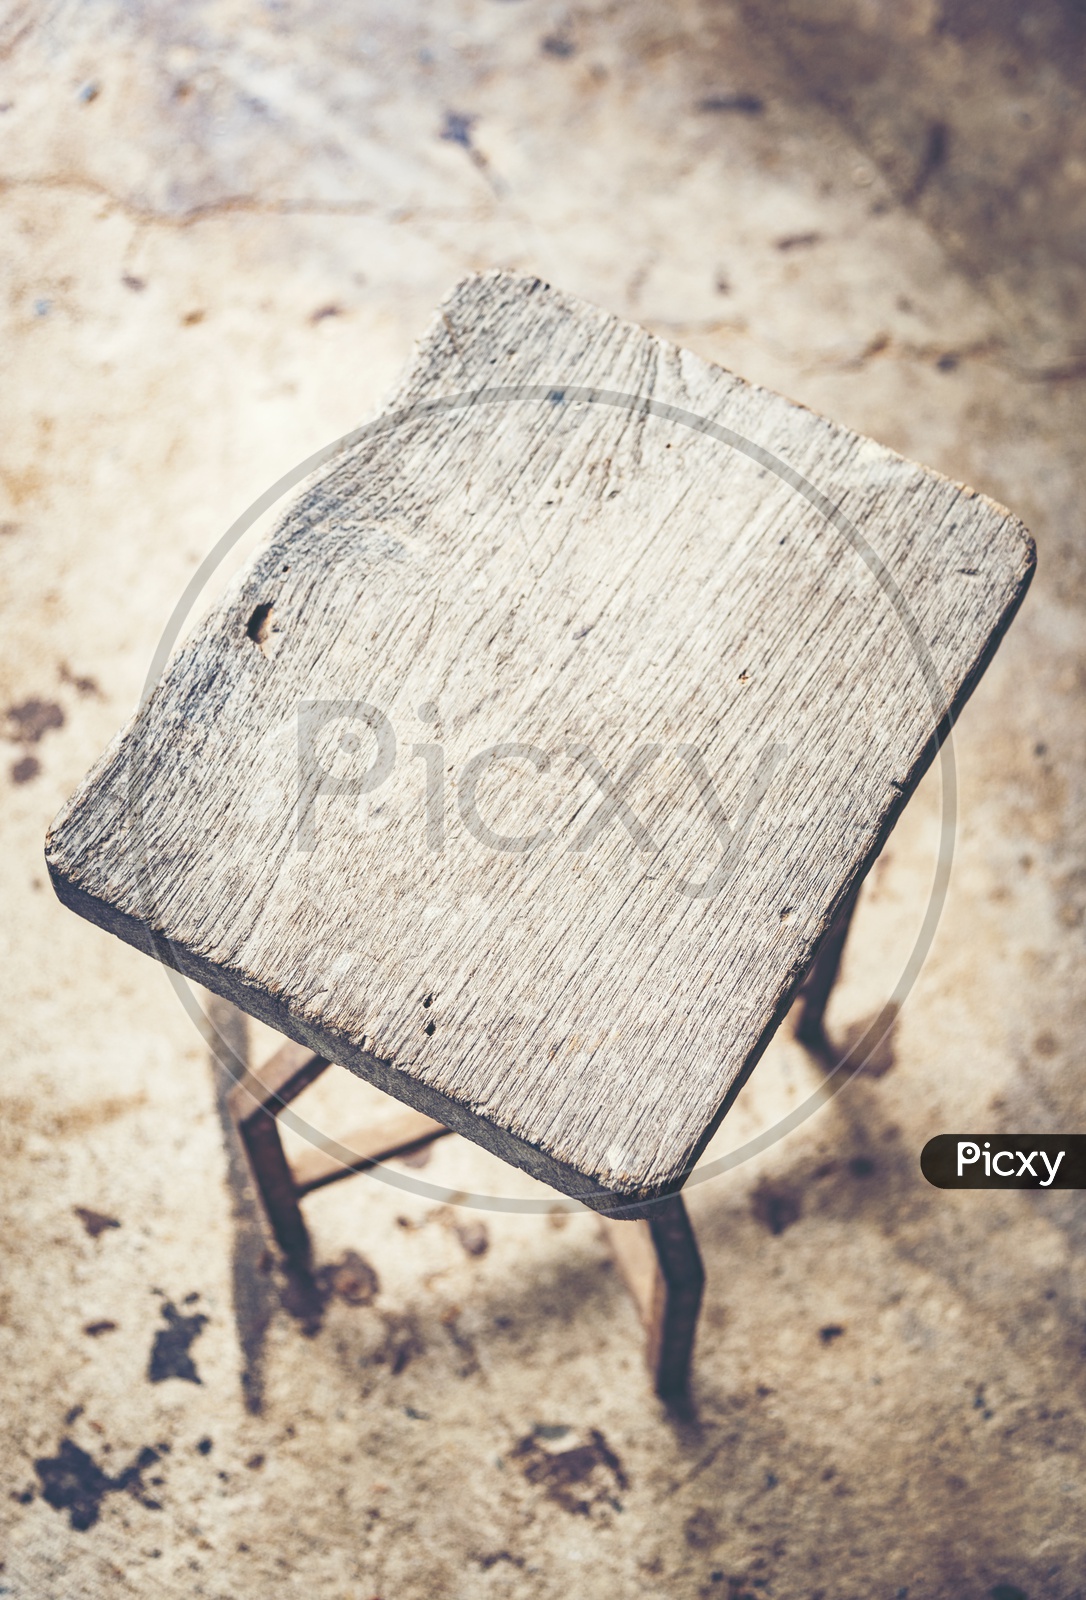 Old wooden chair With Vintage Filter